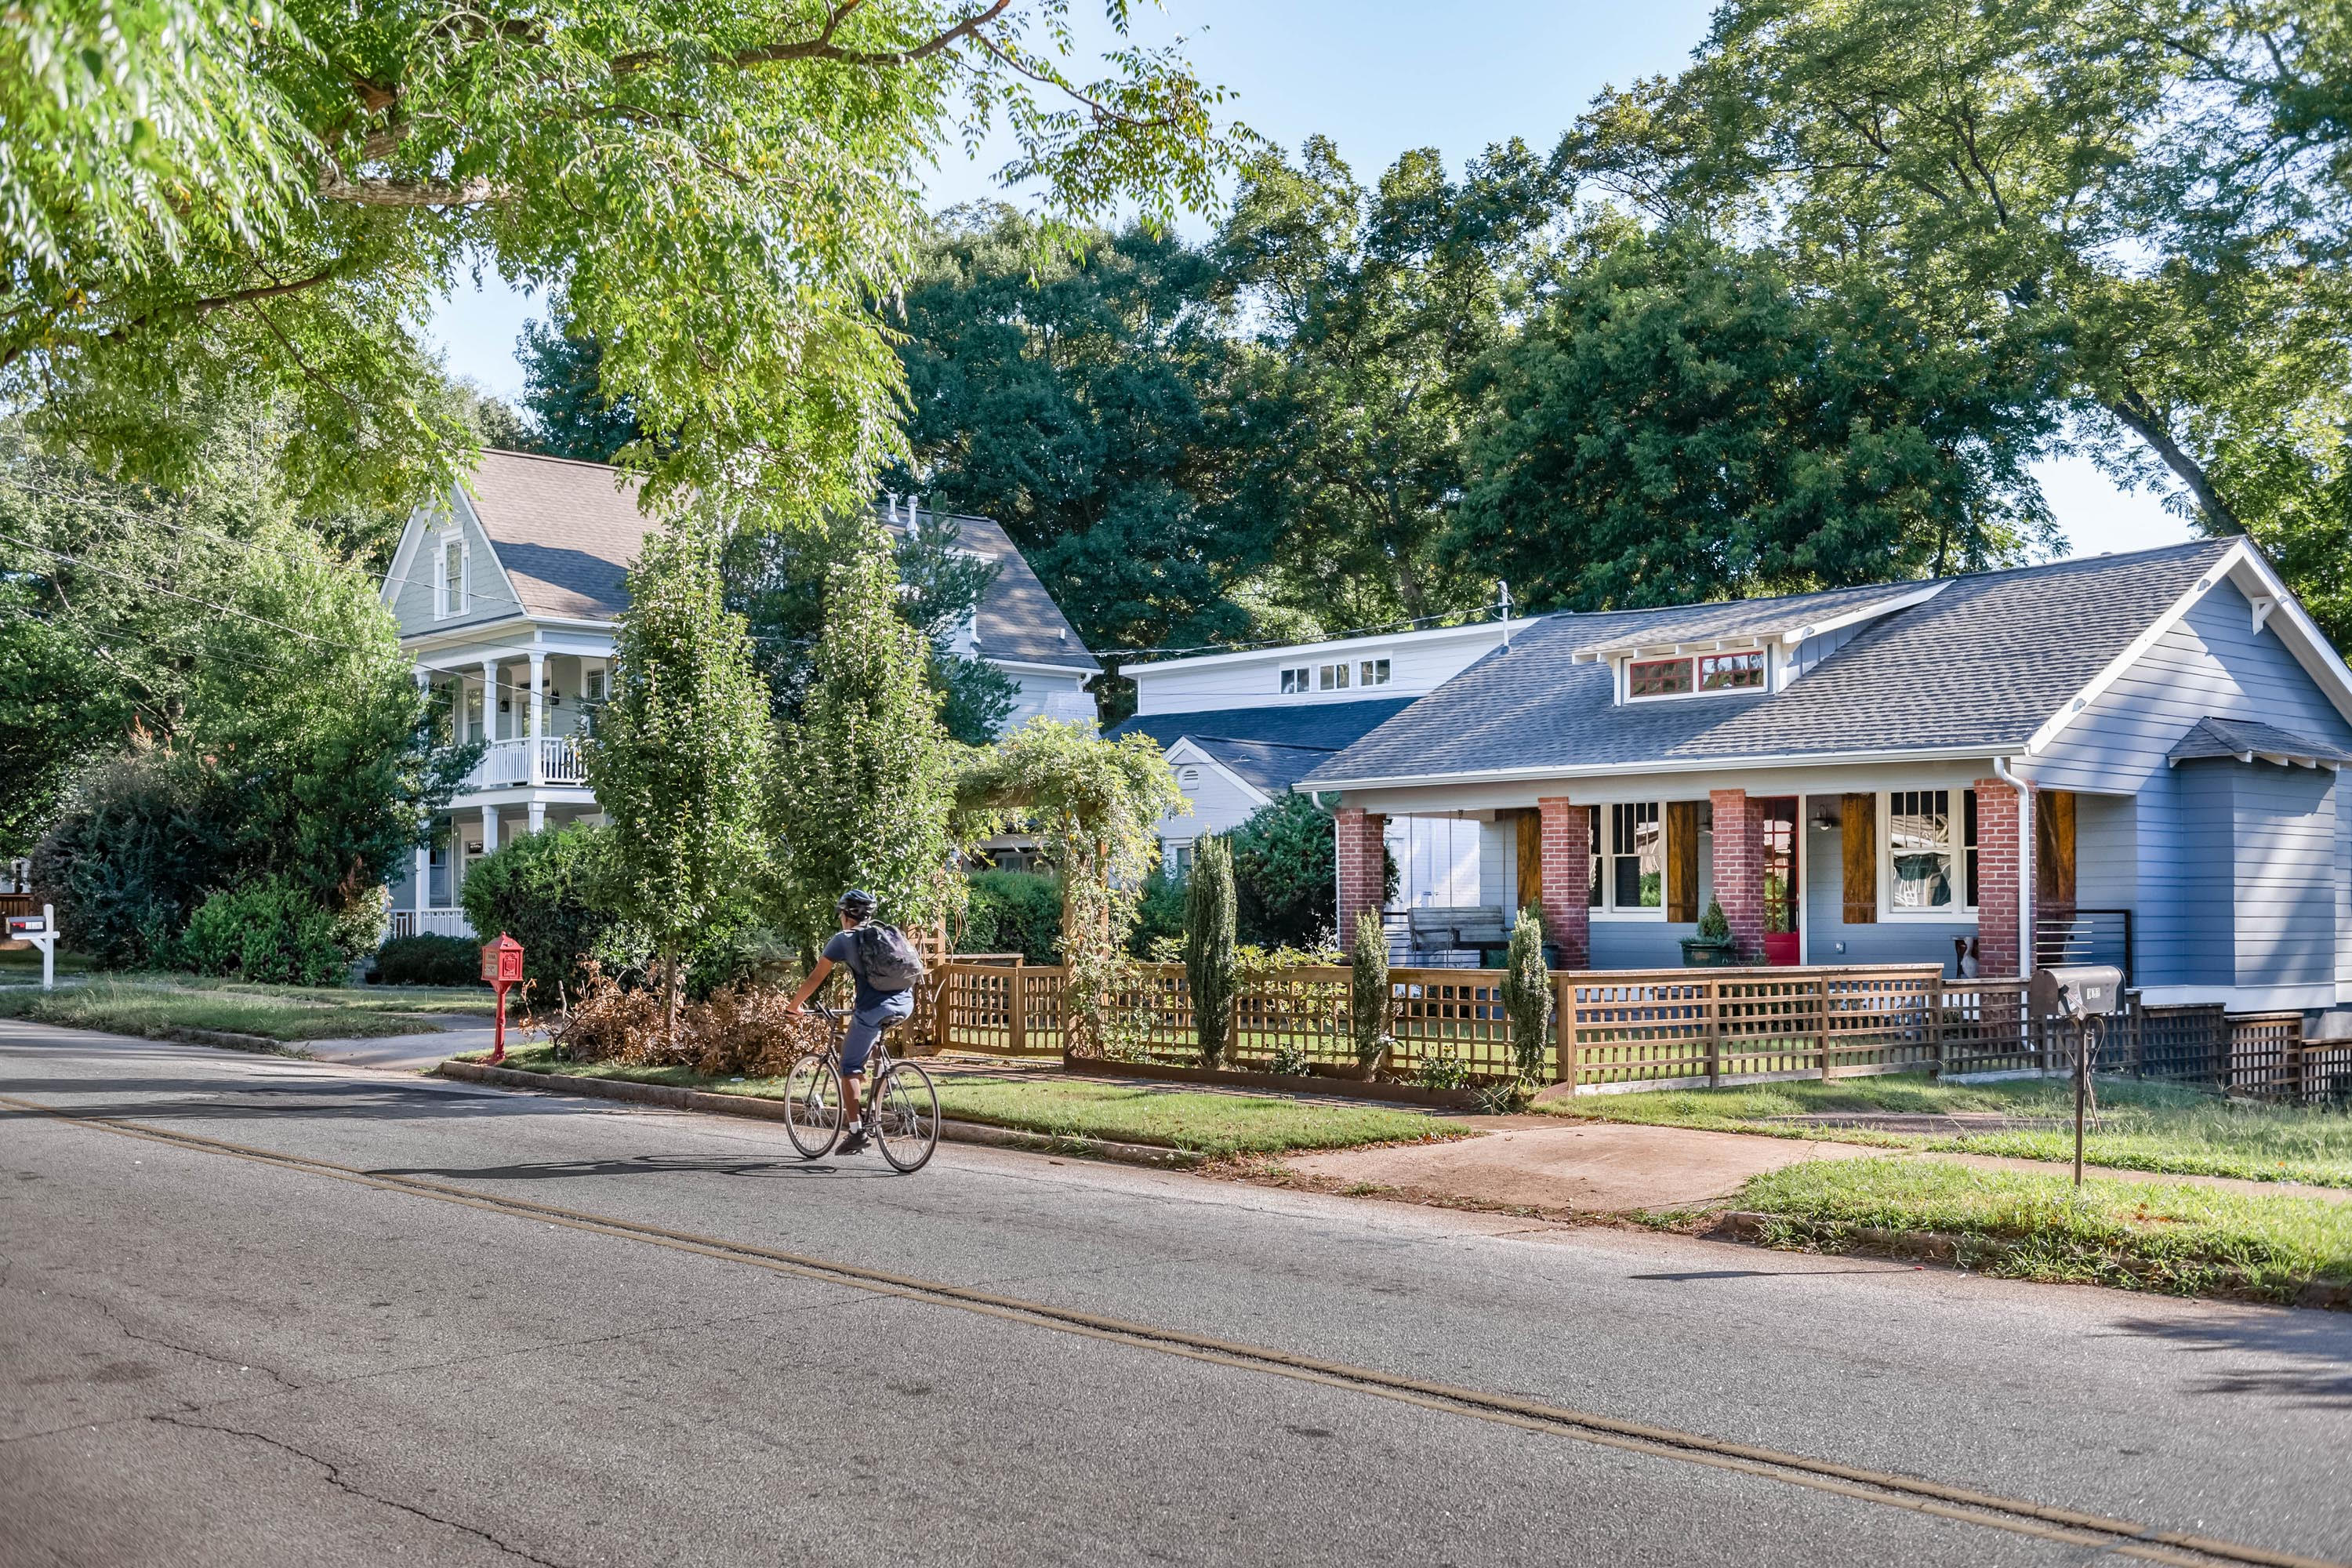 Trulia research: America's most affordable neighborhoods